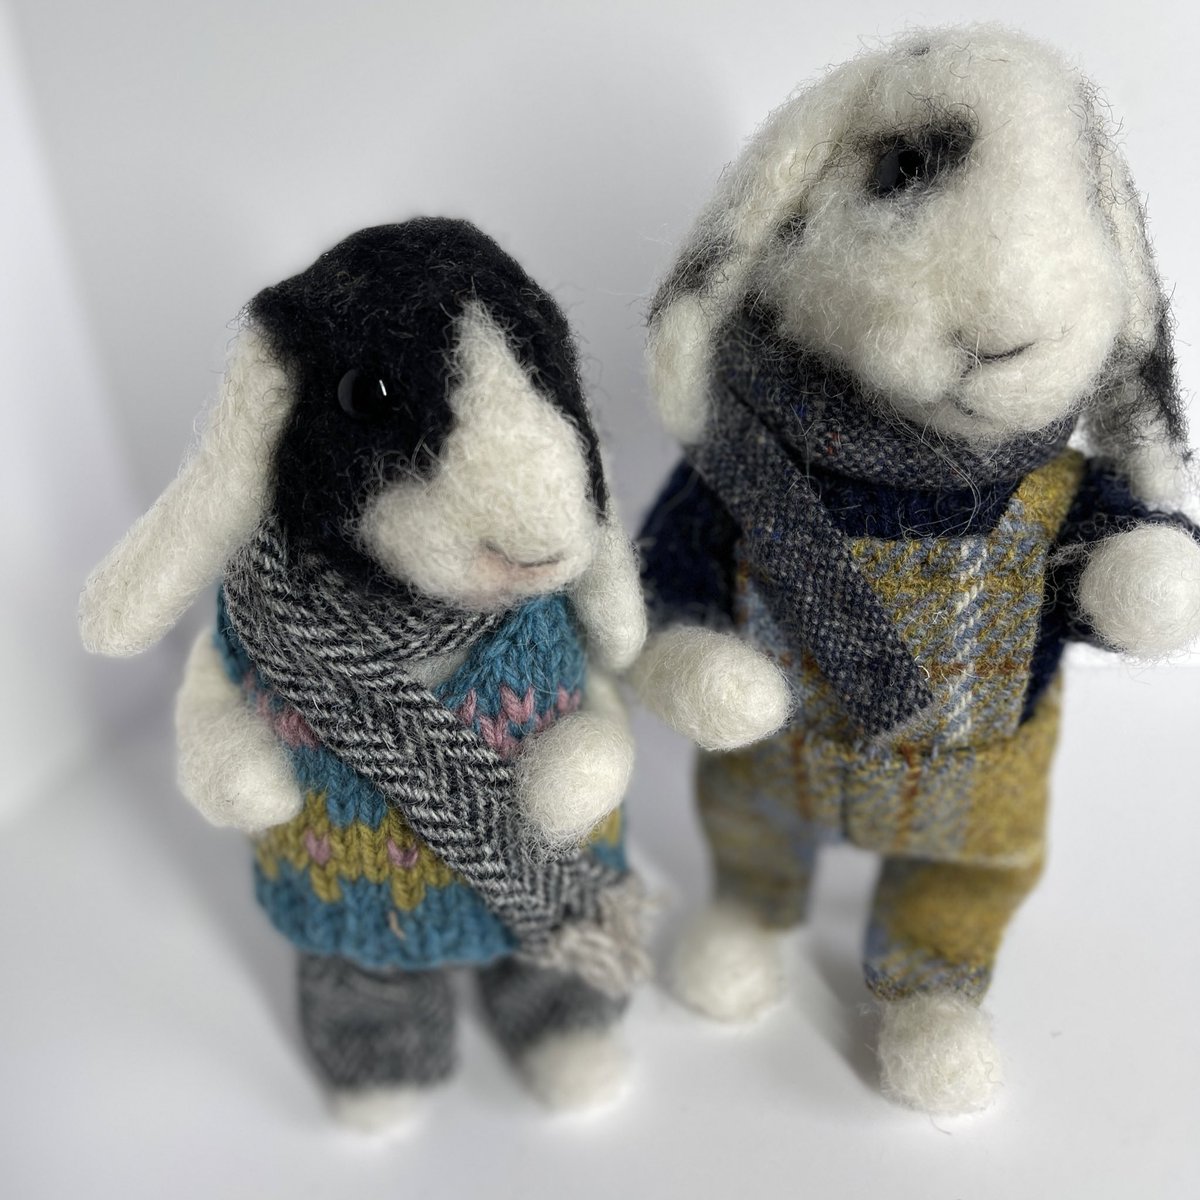 These 2 needle felted bunnies look like they are away to cause mischief of some sort!